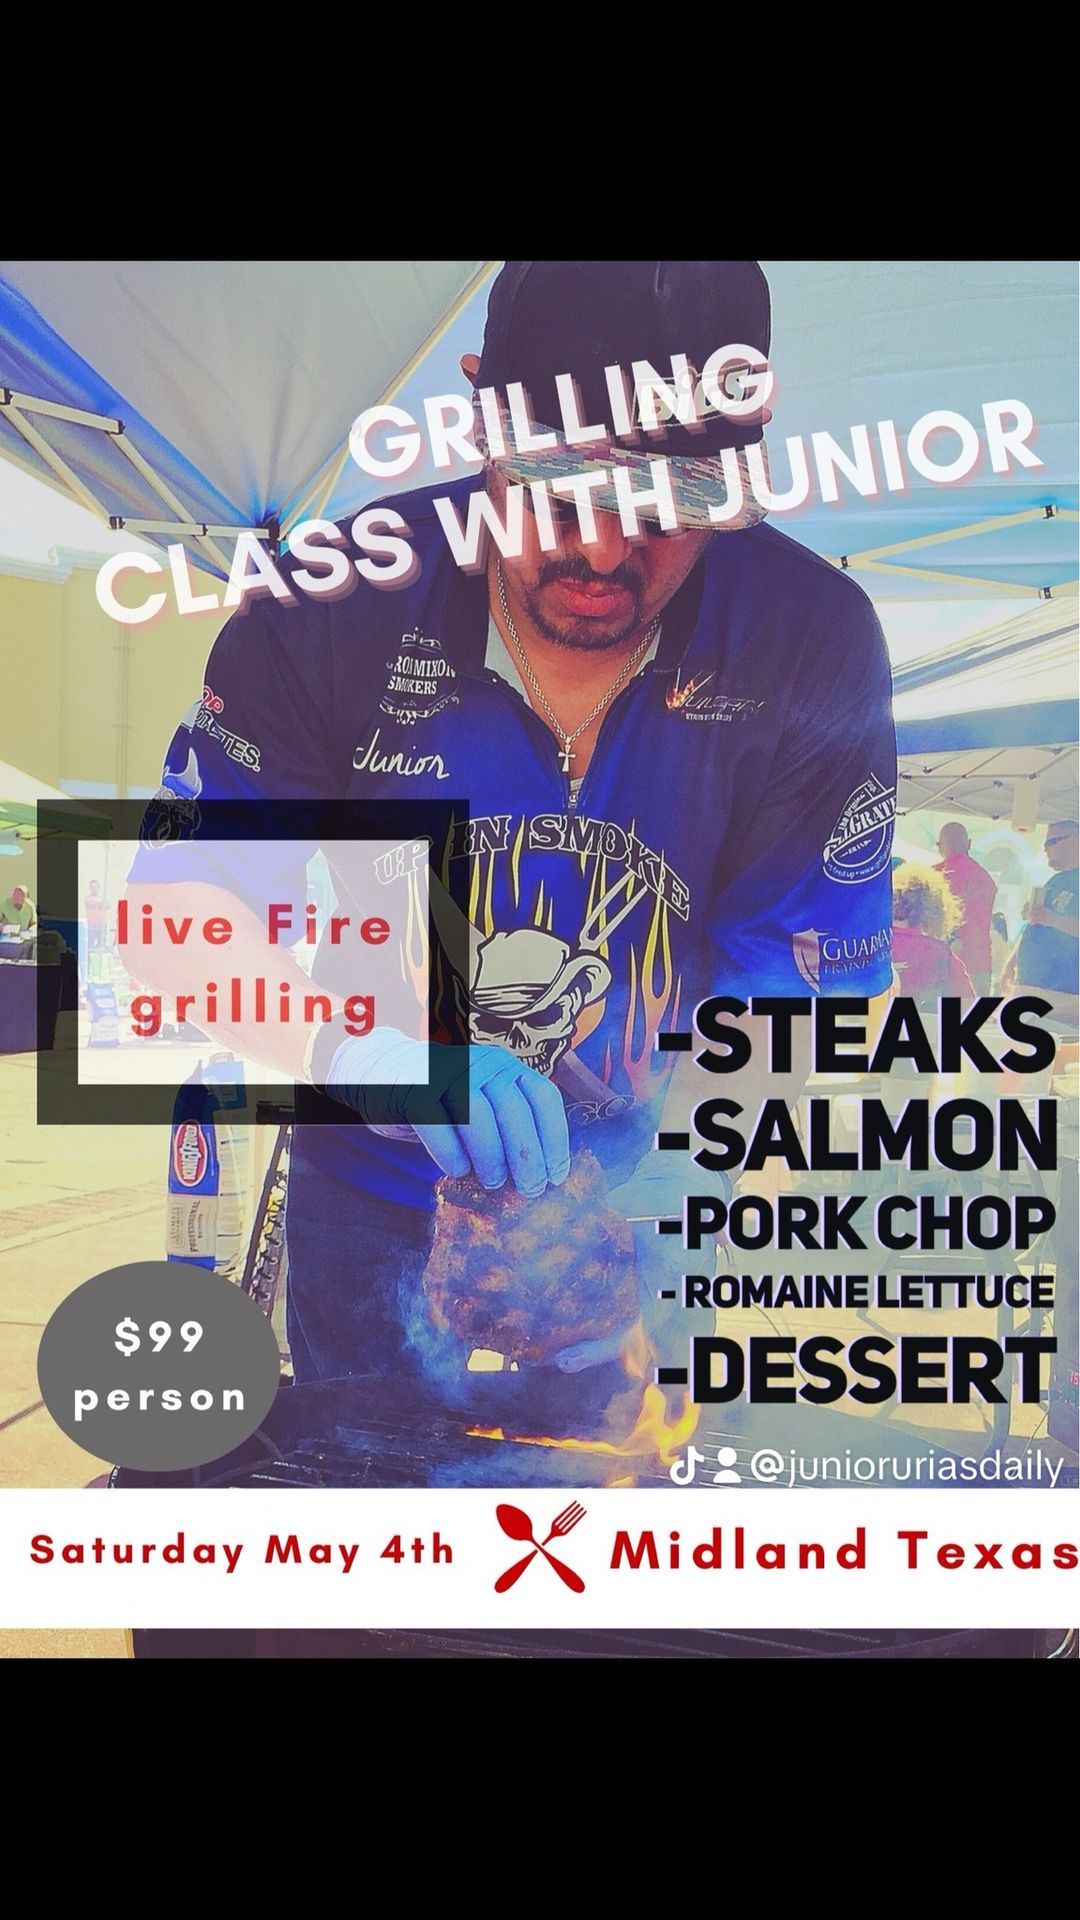 Grilling Class- Midland Texas